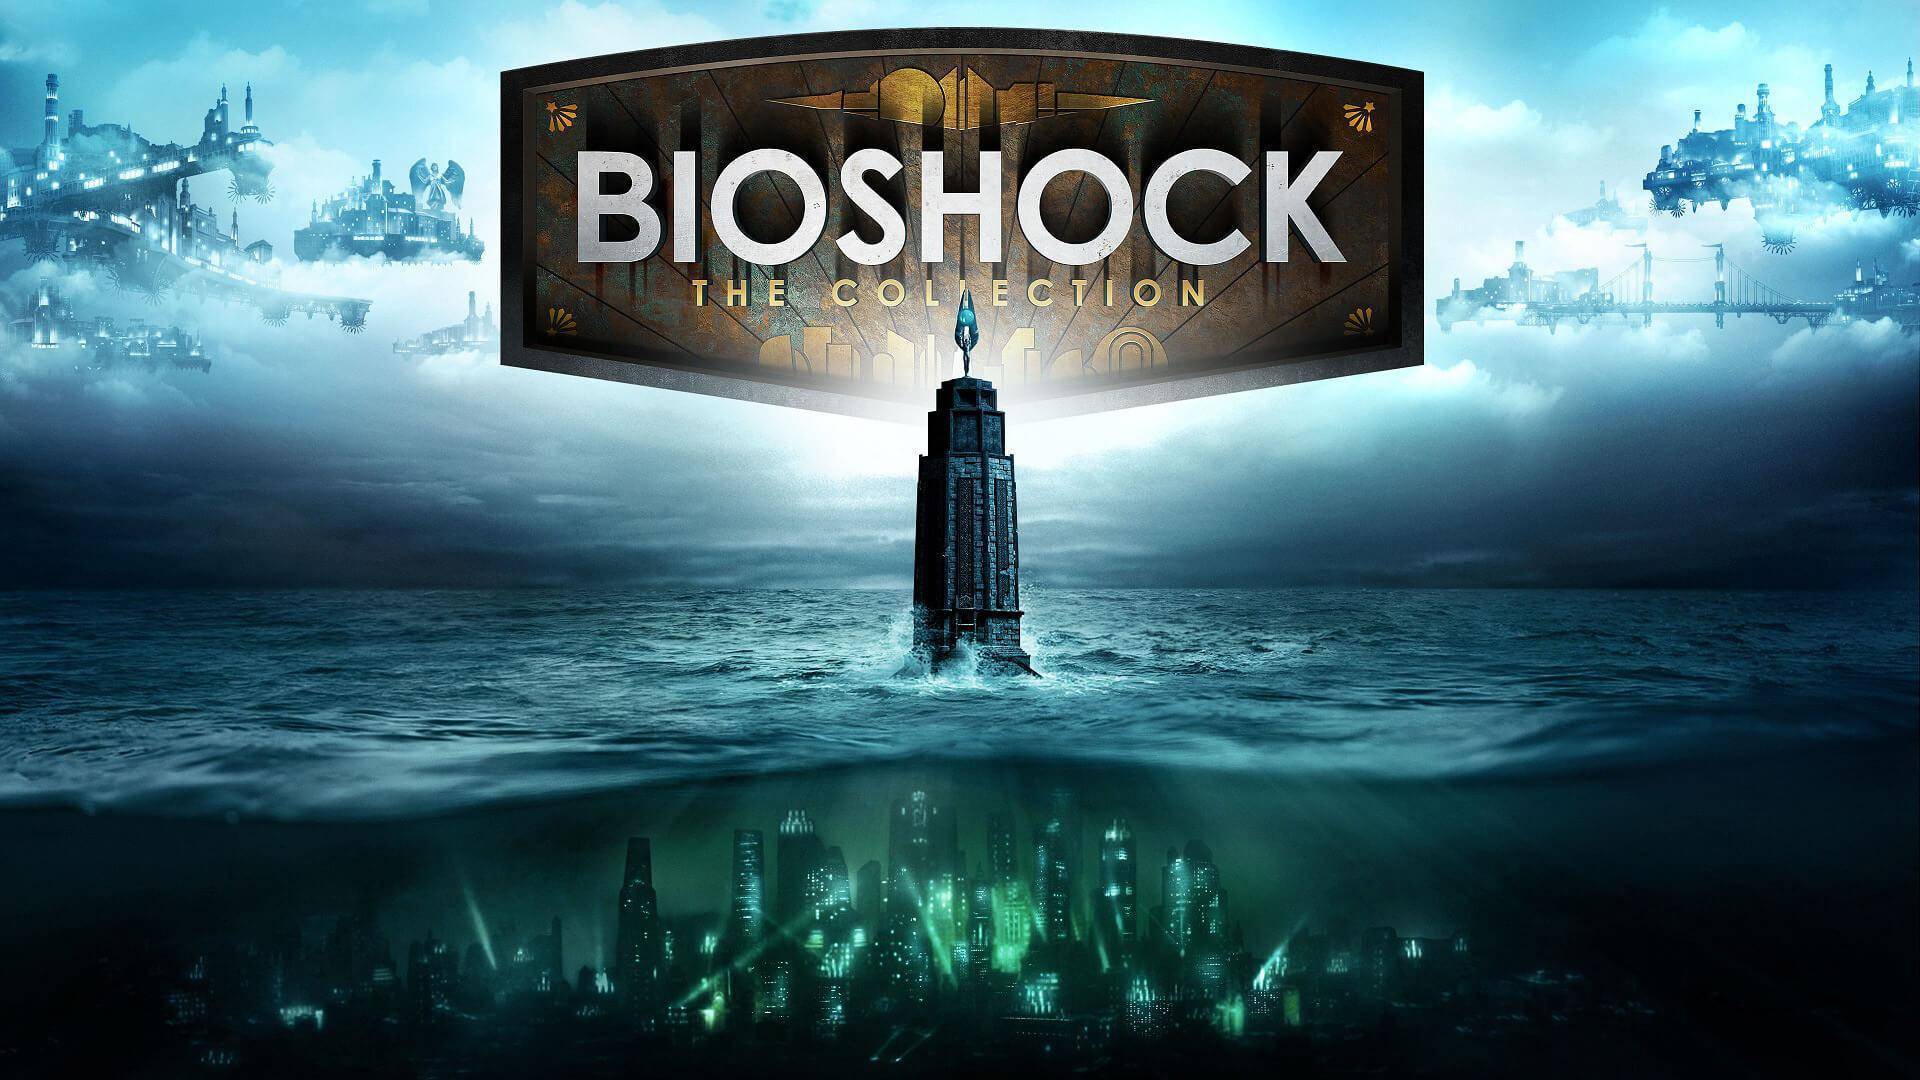 Bioshock Collection (PS4) cheap - Price of $8.27